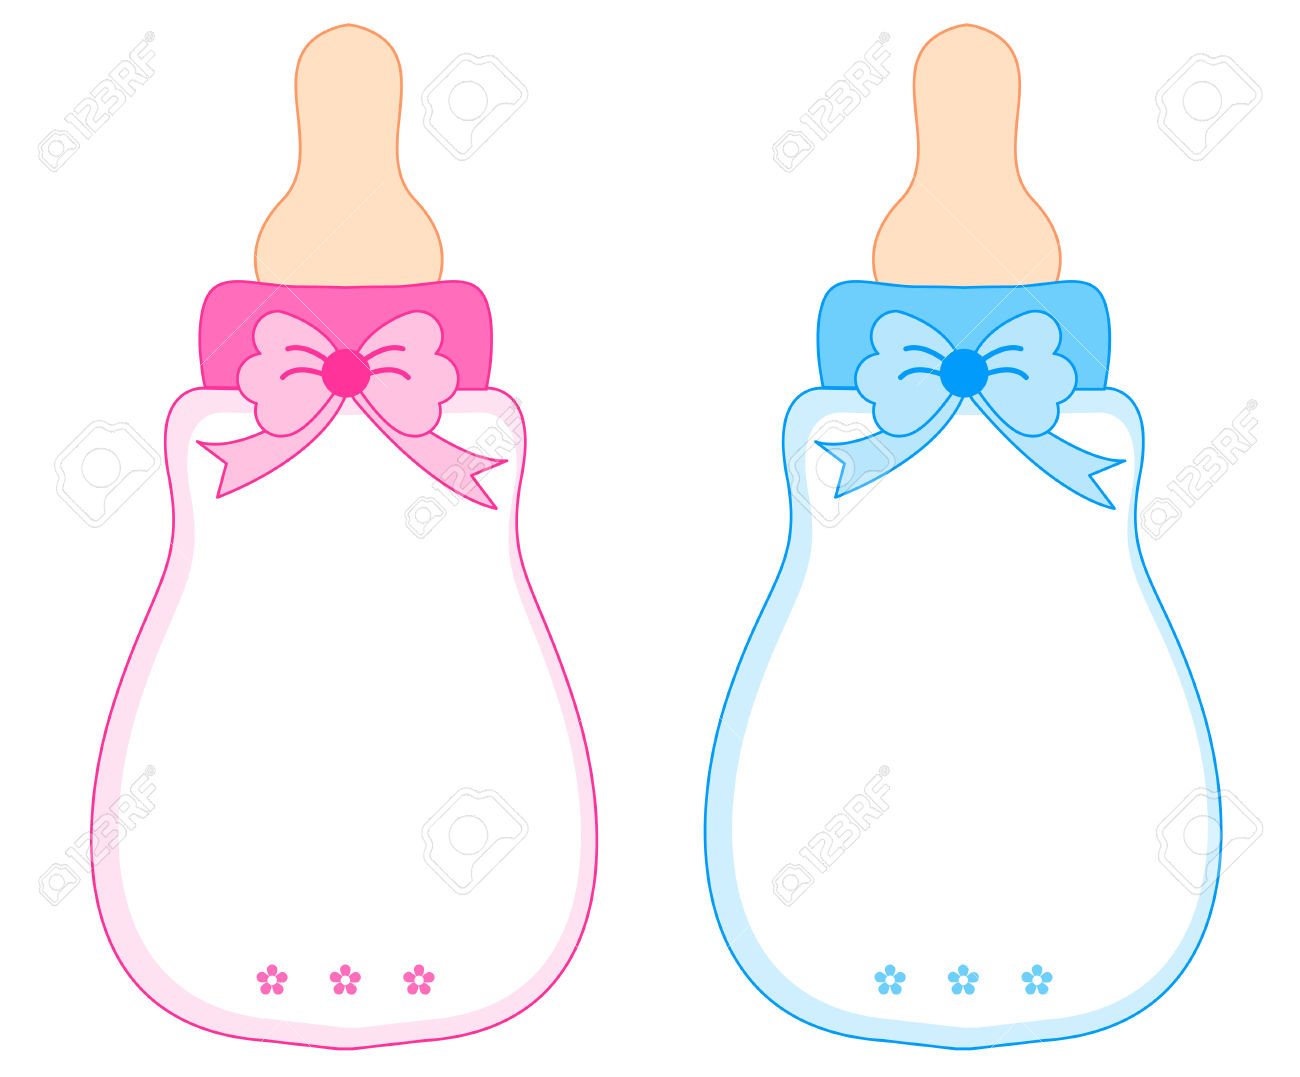 Bottle Clipart Baby Shower Pencil And In Color Www Images Of